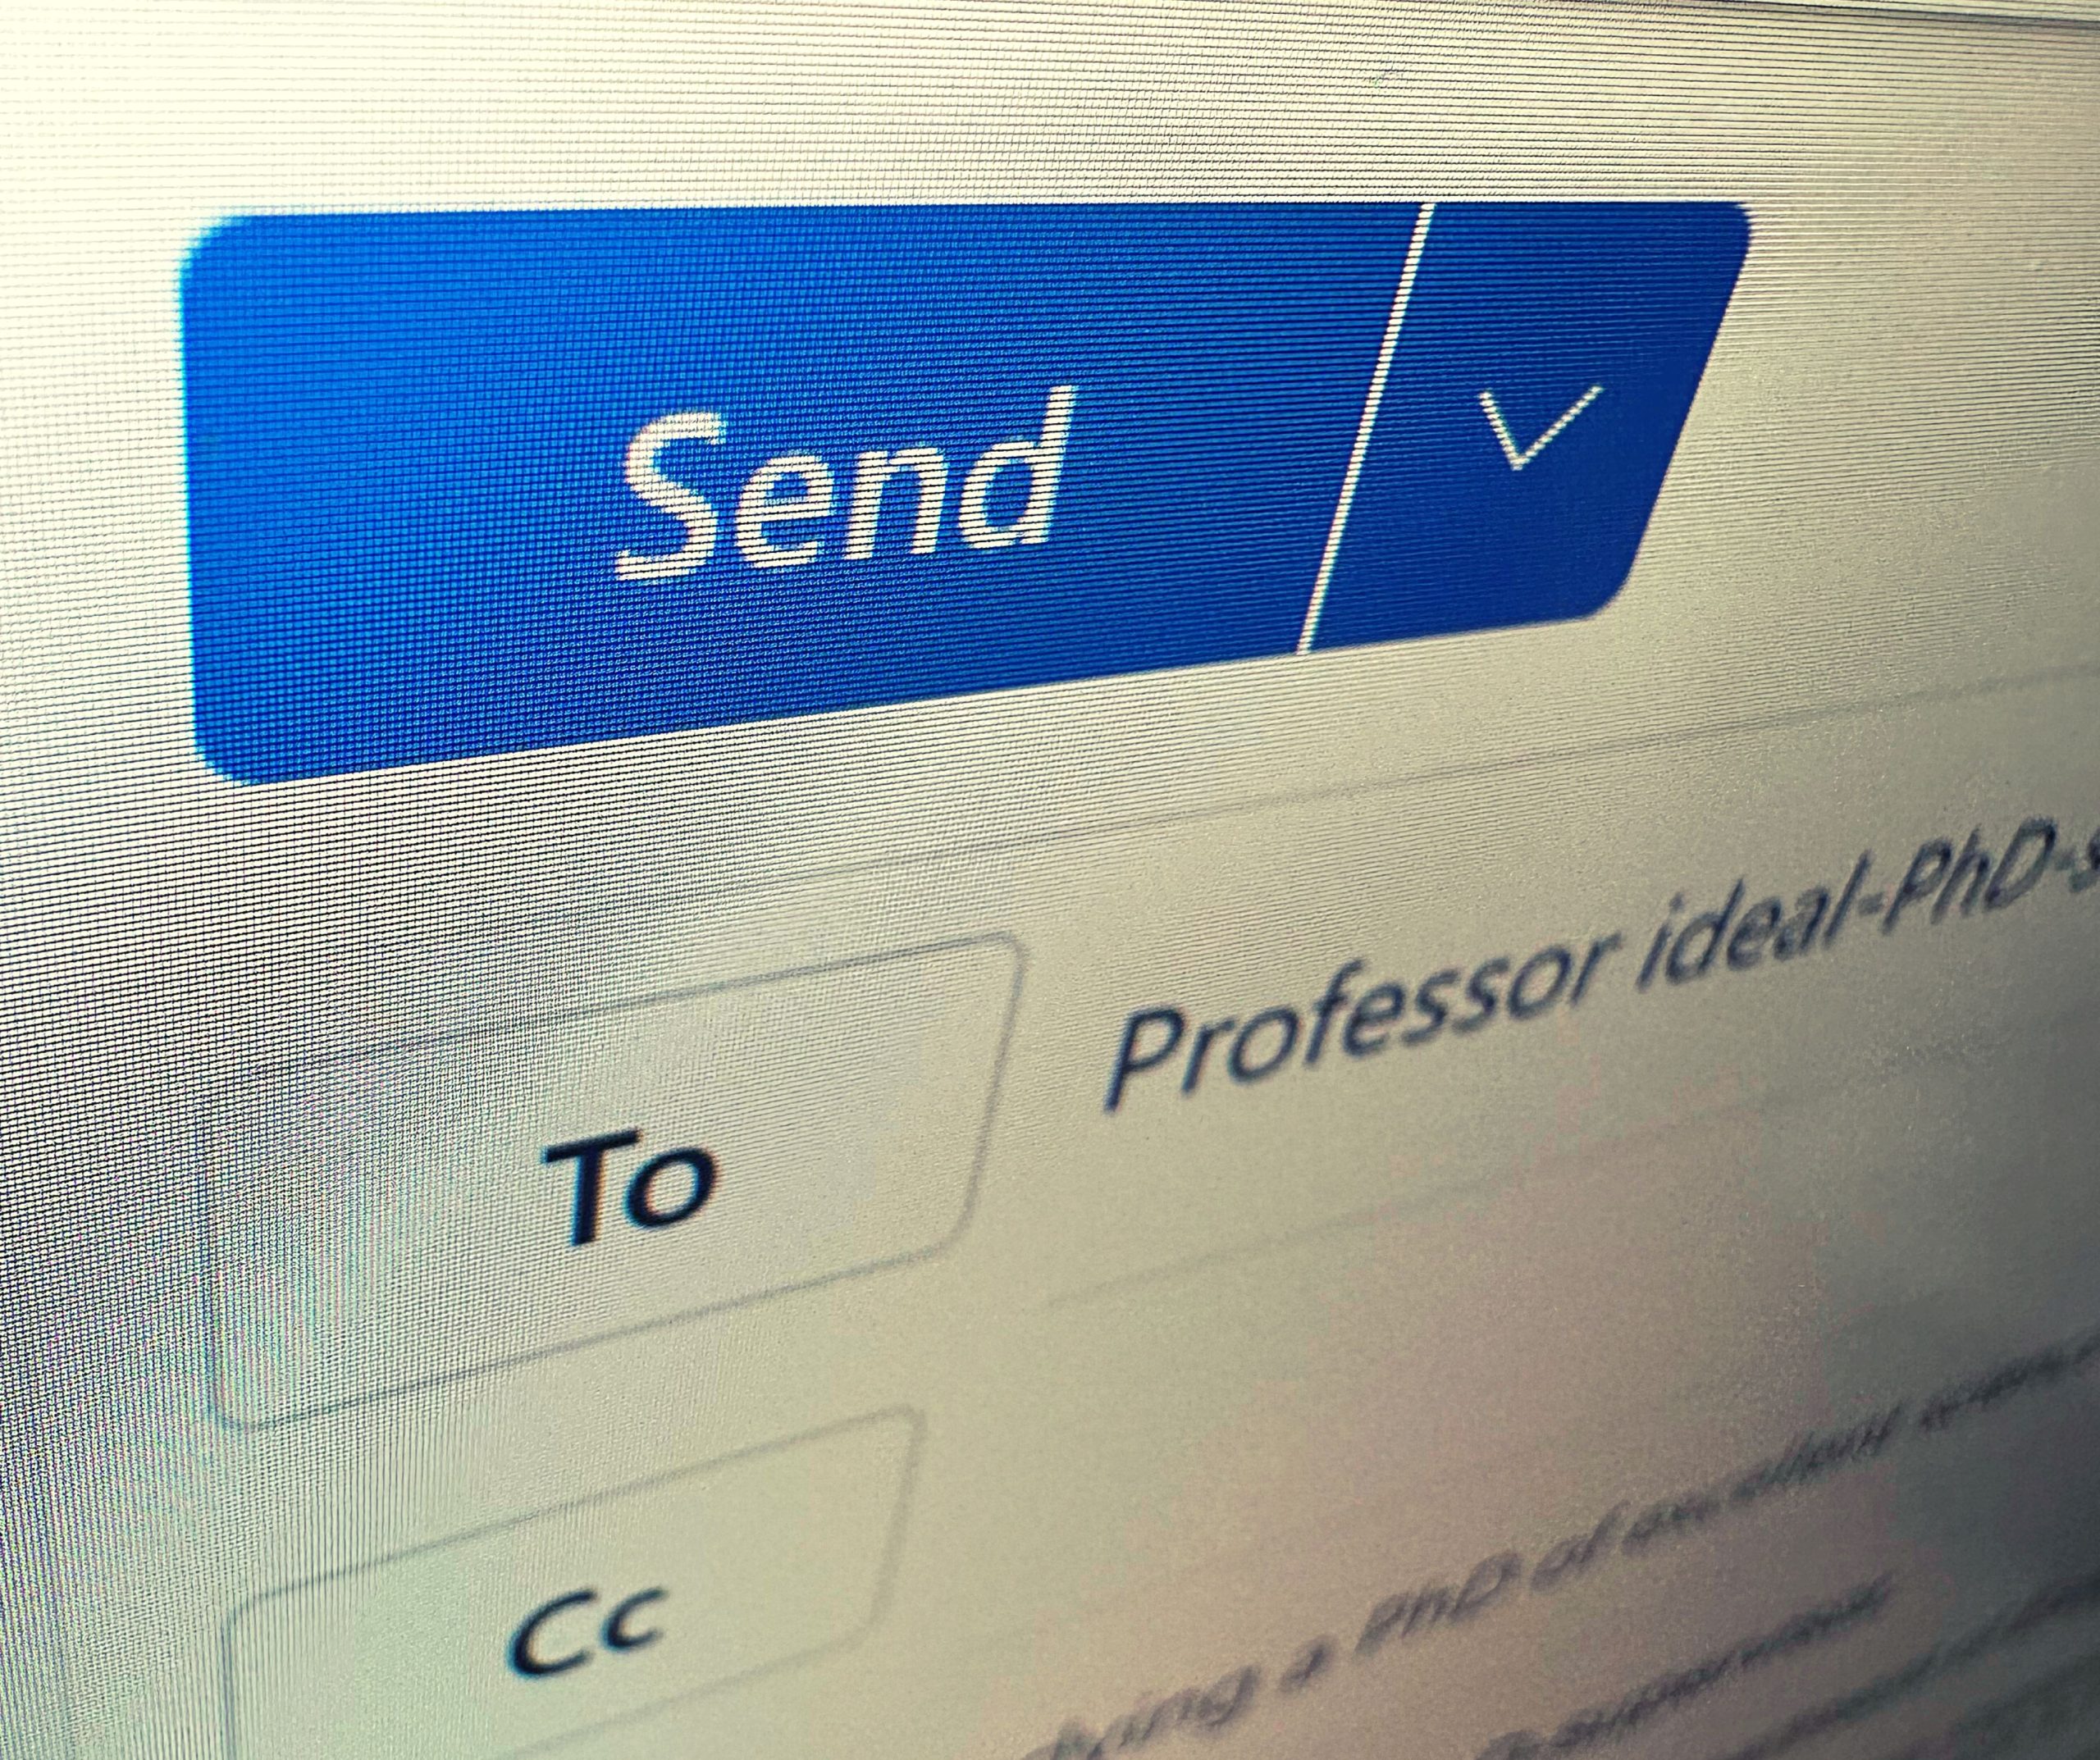 How do I write a cold email for a PhD opportunity?